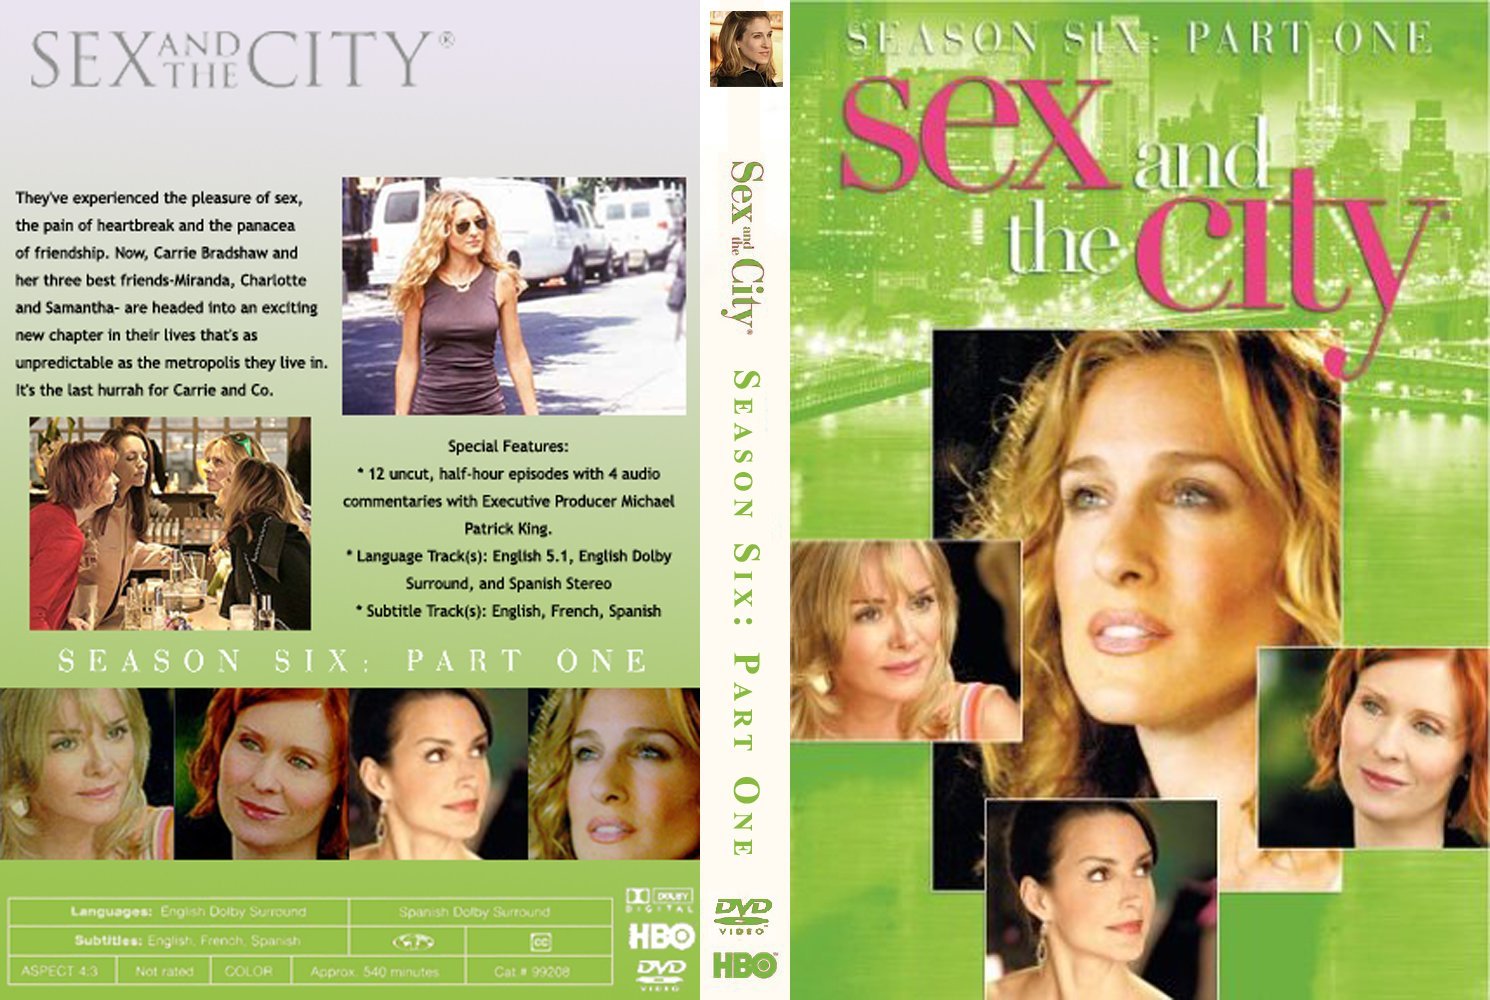 Jaquette DVD Sex and the city Saison 6 DVD 1 Zone1